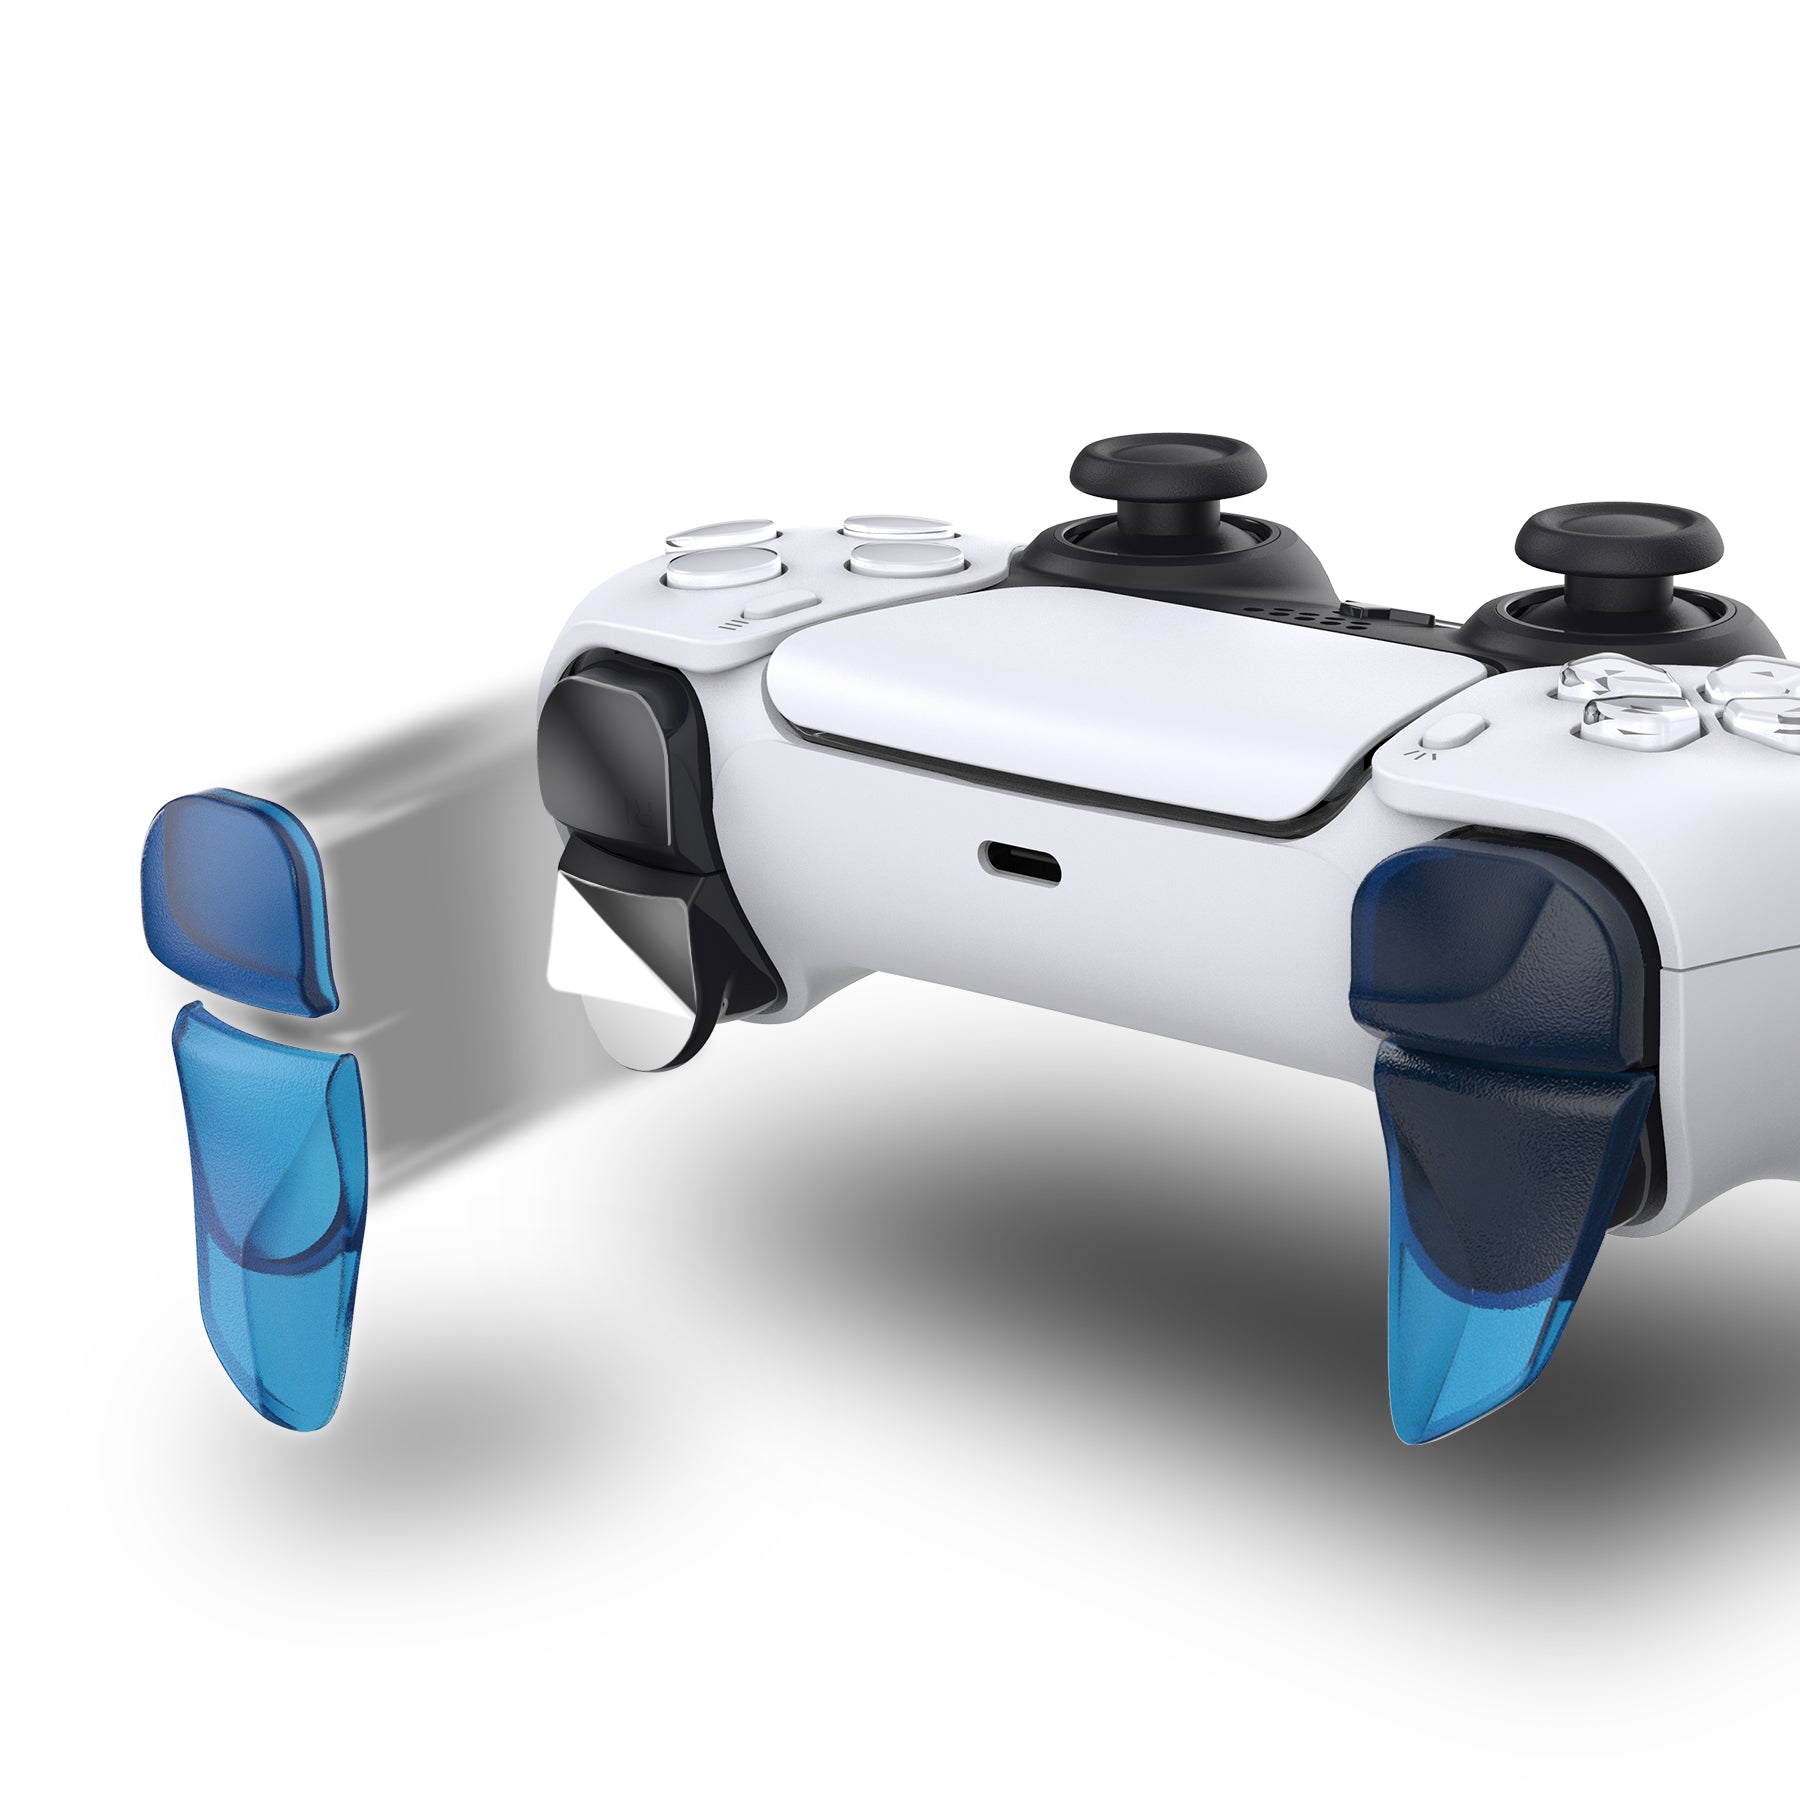 PlayVital Clear Blue 2 Pair Shoulder Buttons Extension Triggers for PS5 Controller, Game Improvement Adjusters for PS5 Controller, Bumper Trigger Extenders for PS5 Controller - PFPJ043 PlayVital